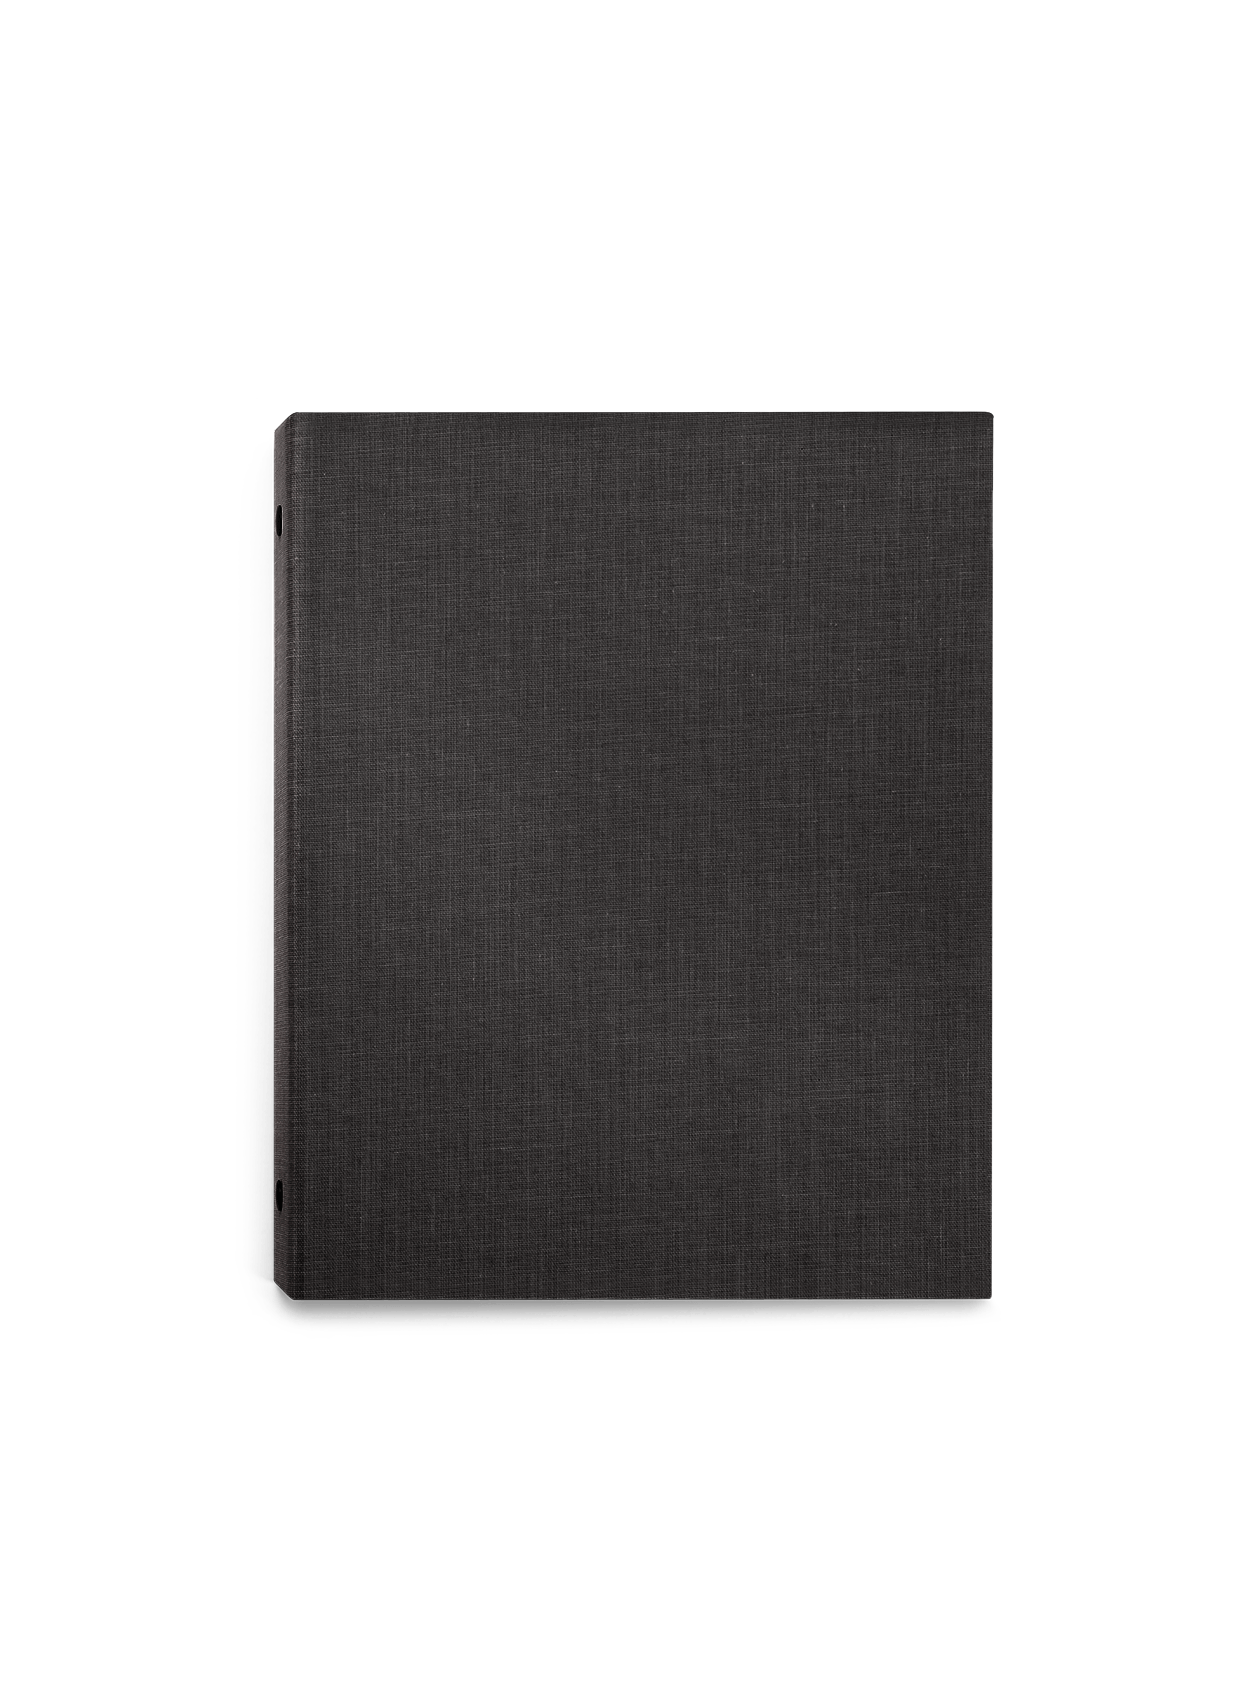 The Appointed 24-25 Daily Planner in Charcoal Gray with casebound hardcover and gold foil details || Charcoal Gray